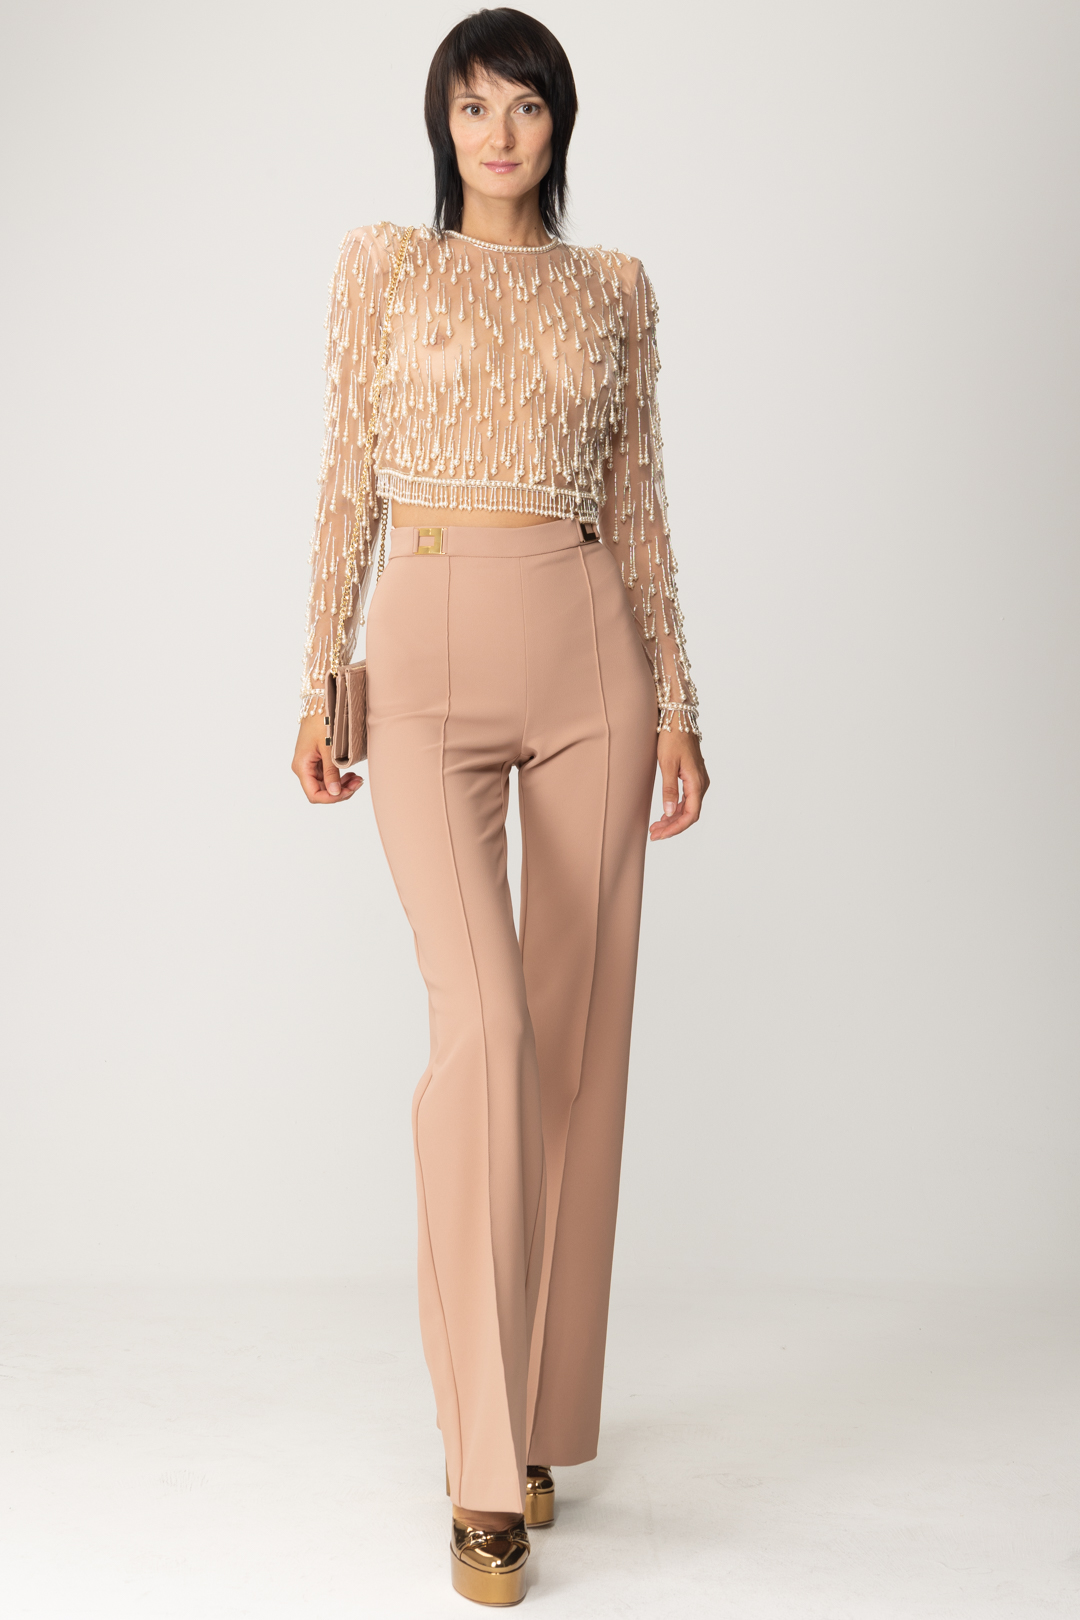 Preview: Elisabetta Franchi Tulle top with pearls embroidery Nudo